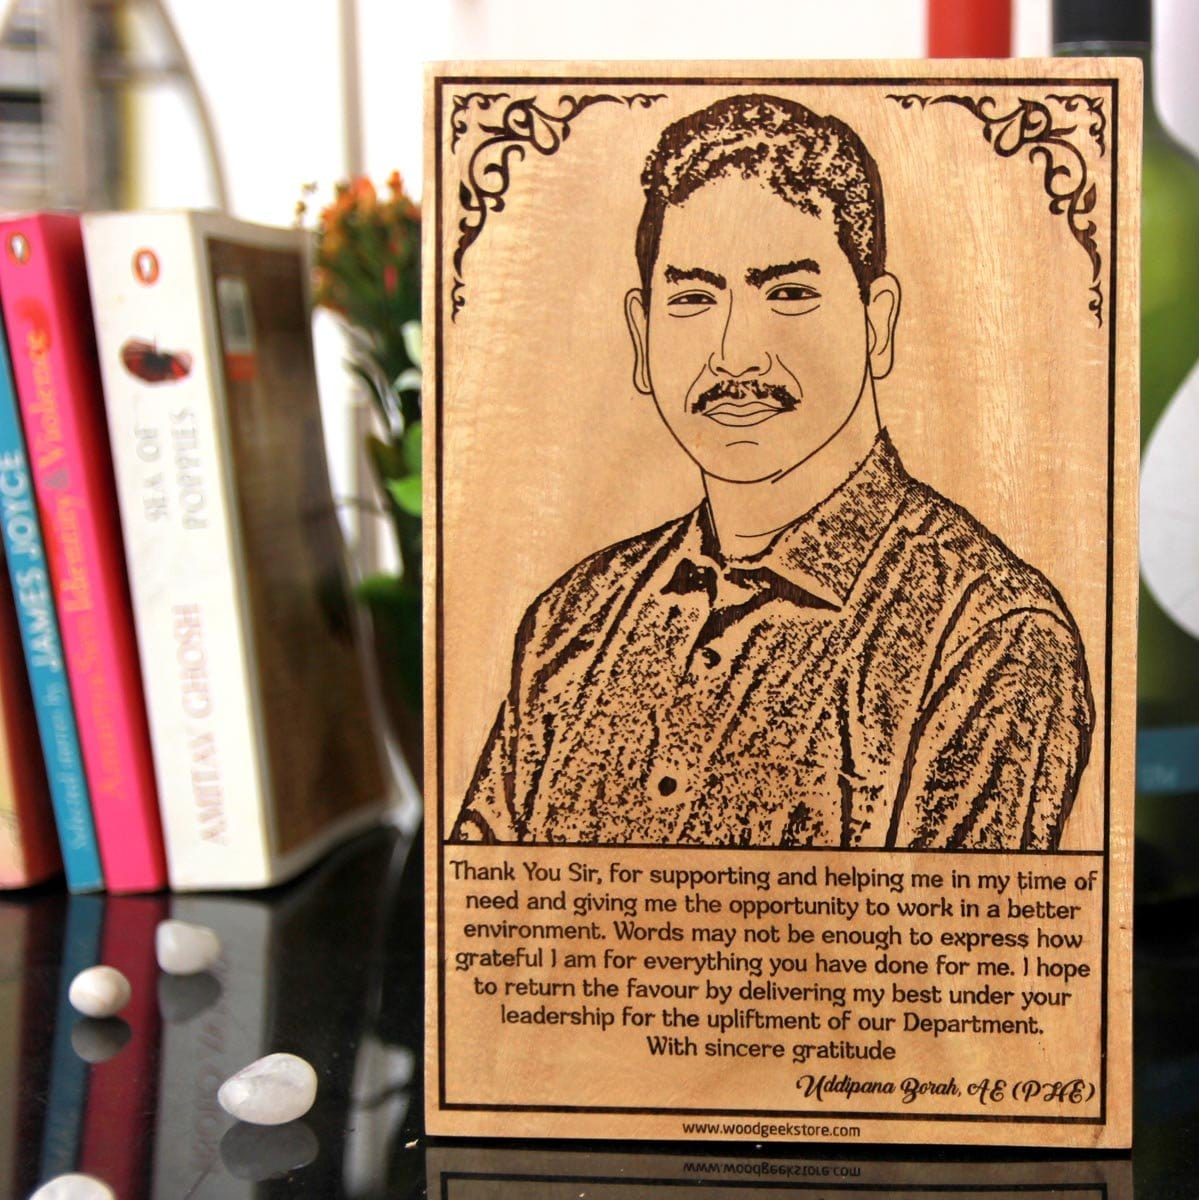 Thank You Sir Wood Engraved Photo With Thank You Sir Note. This Photo On Wood Is The Best Gift For Sir. Looking For Teacher's Day Gifts Online? This Is The Best Gift For Boss On Teacher's Day.